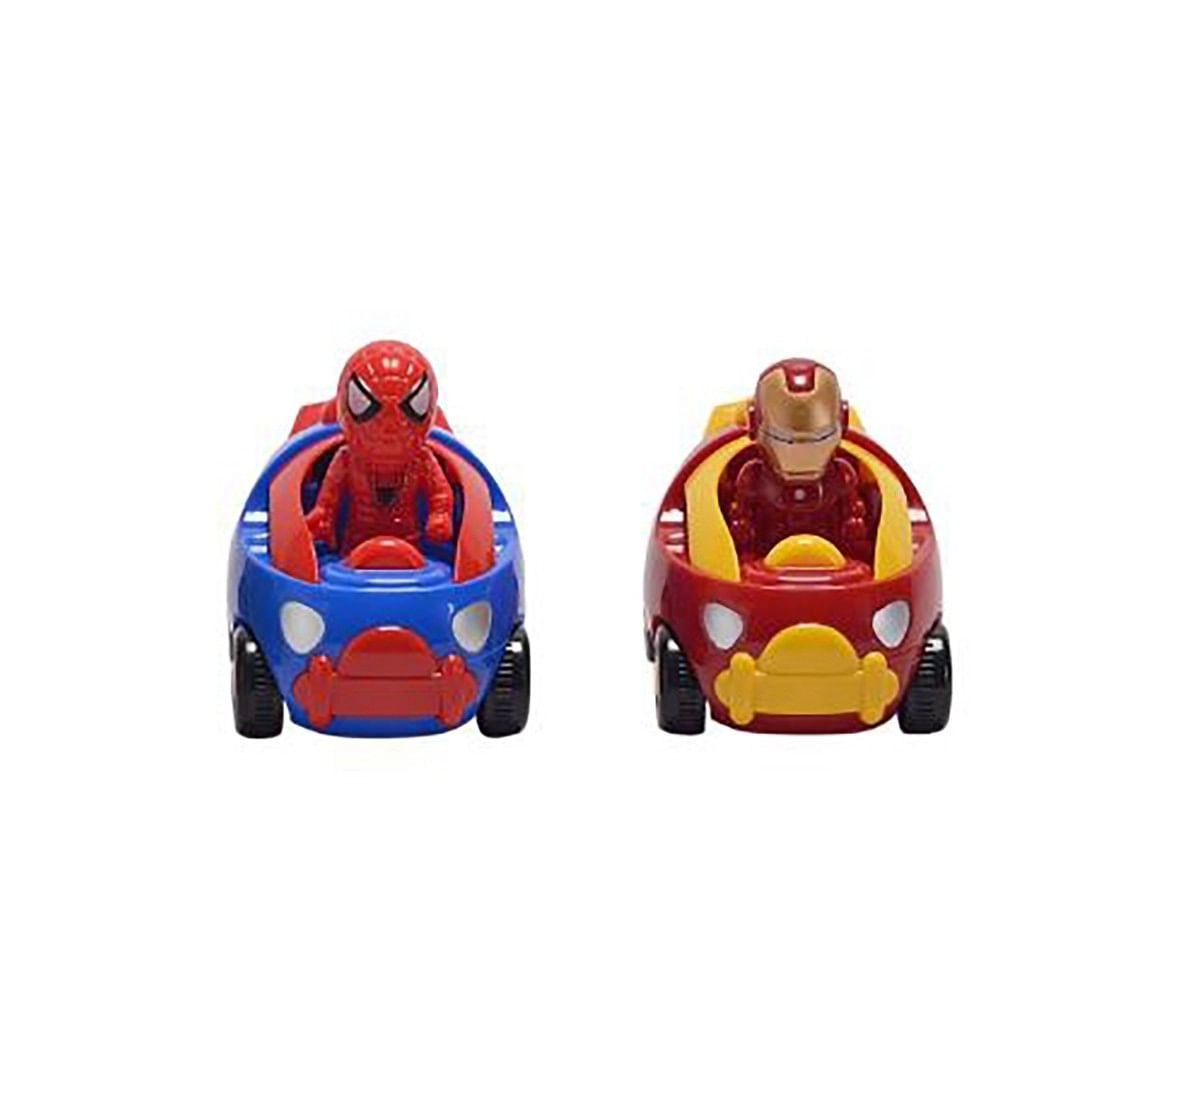 Marvel Avengers Iron Man Stork Truck-Red Vehicles for Kids age 3Y+ (Red)